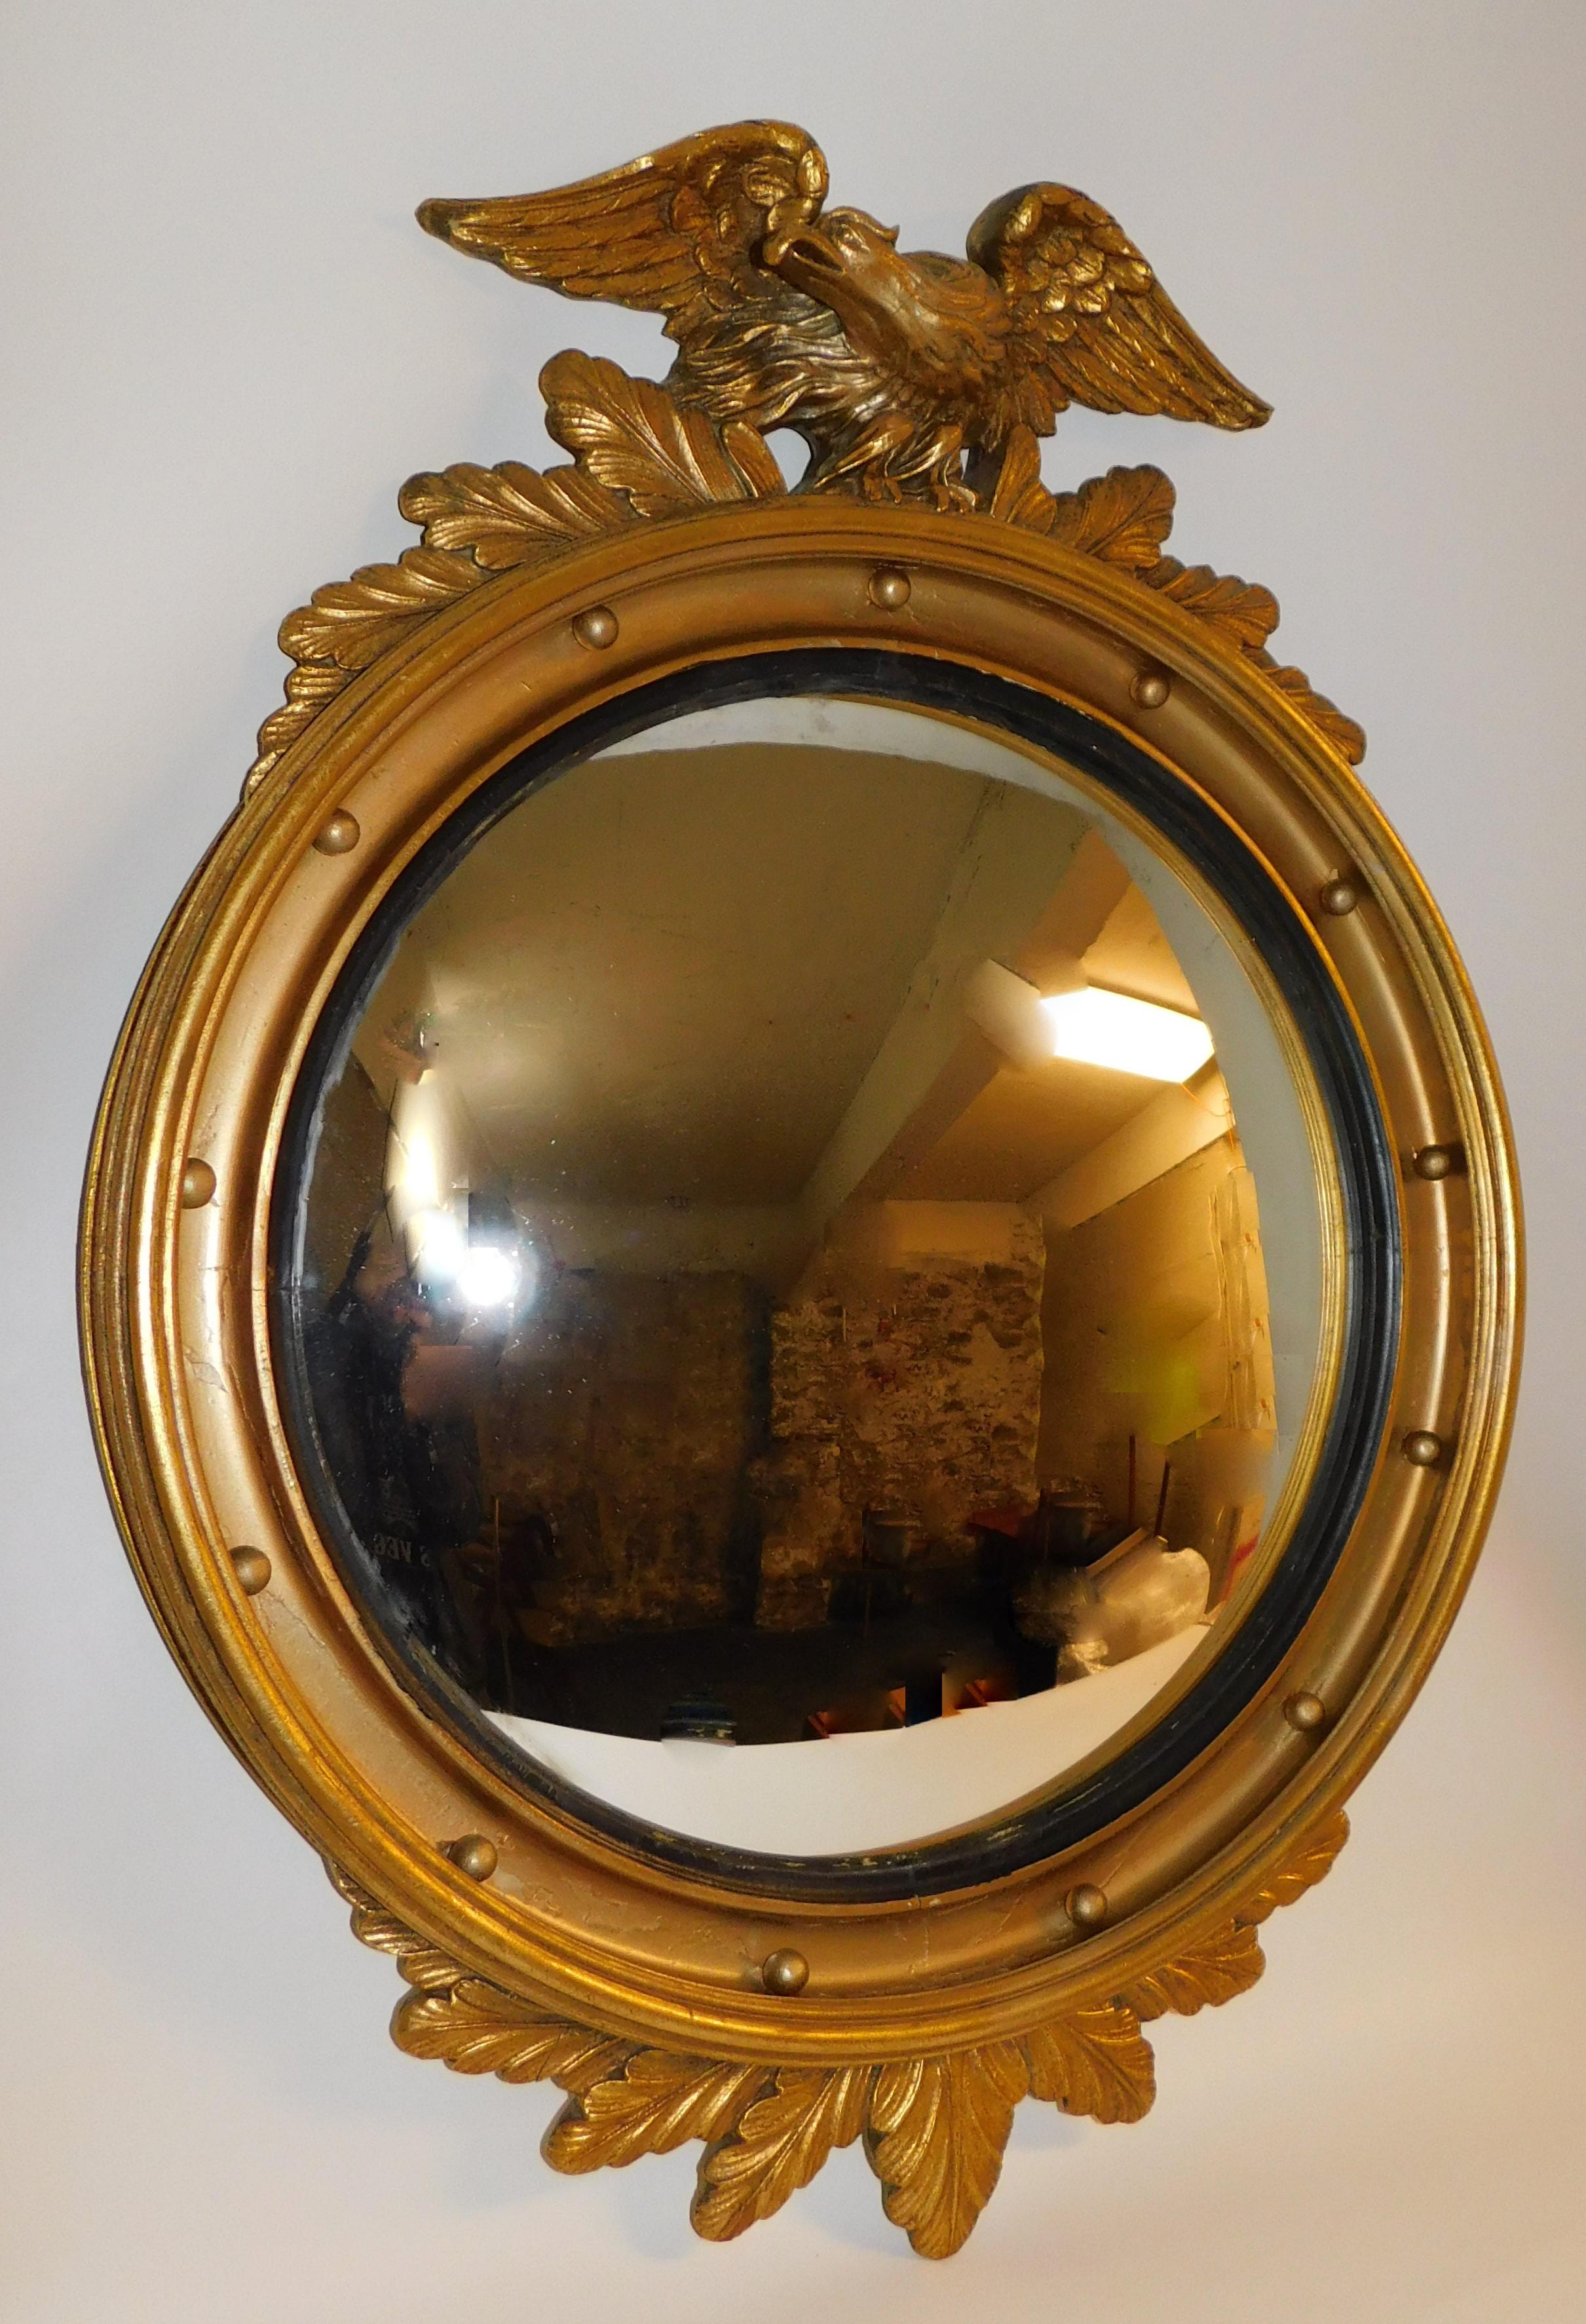 Large antique 19th century American gilt carved wood oval convex mirror with eagle perched to flee on top, circular interior spheres, and fitted ebonized reeded ring covered in gilding that is mostly intact. Mirror retains the original glass, tape